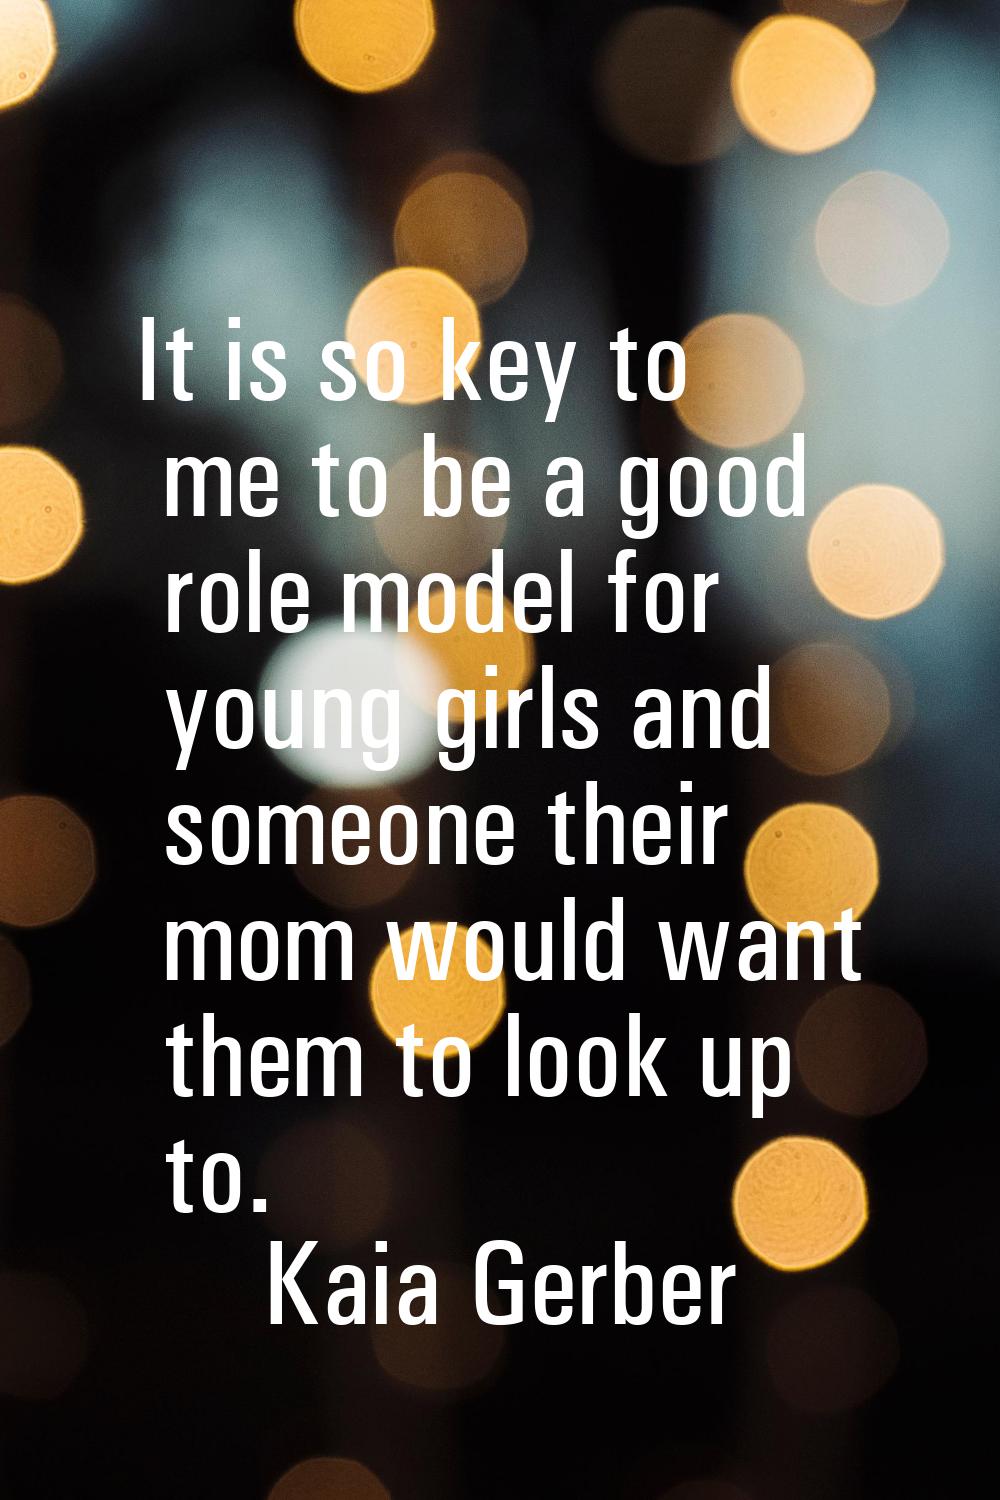 It is so key to me to be a good role model for young girls and someone their mom would want them to